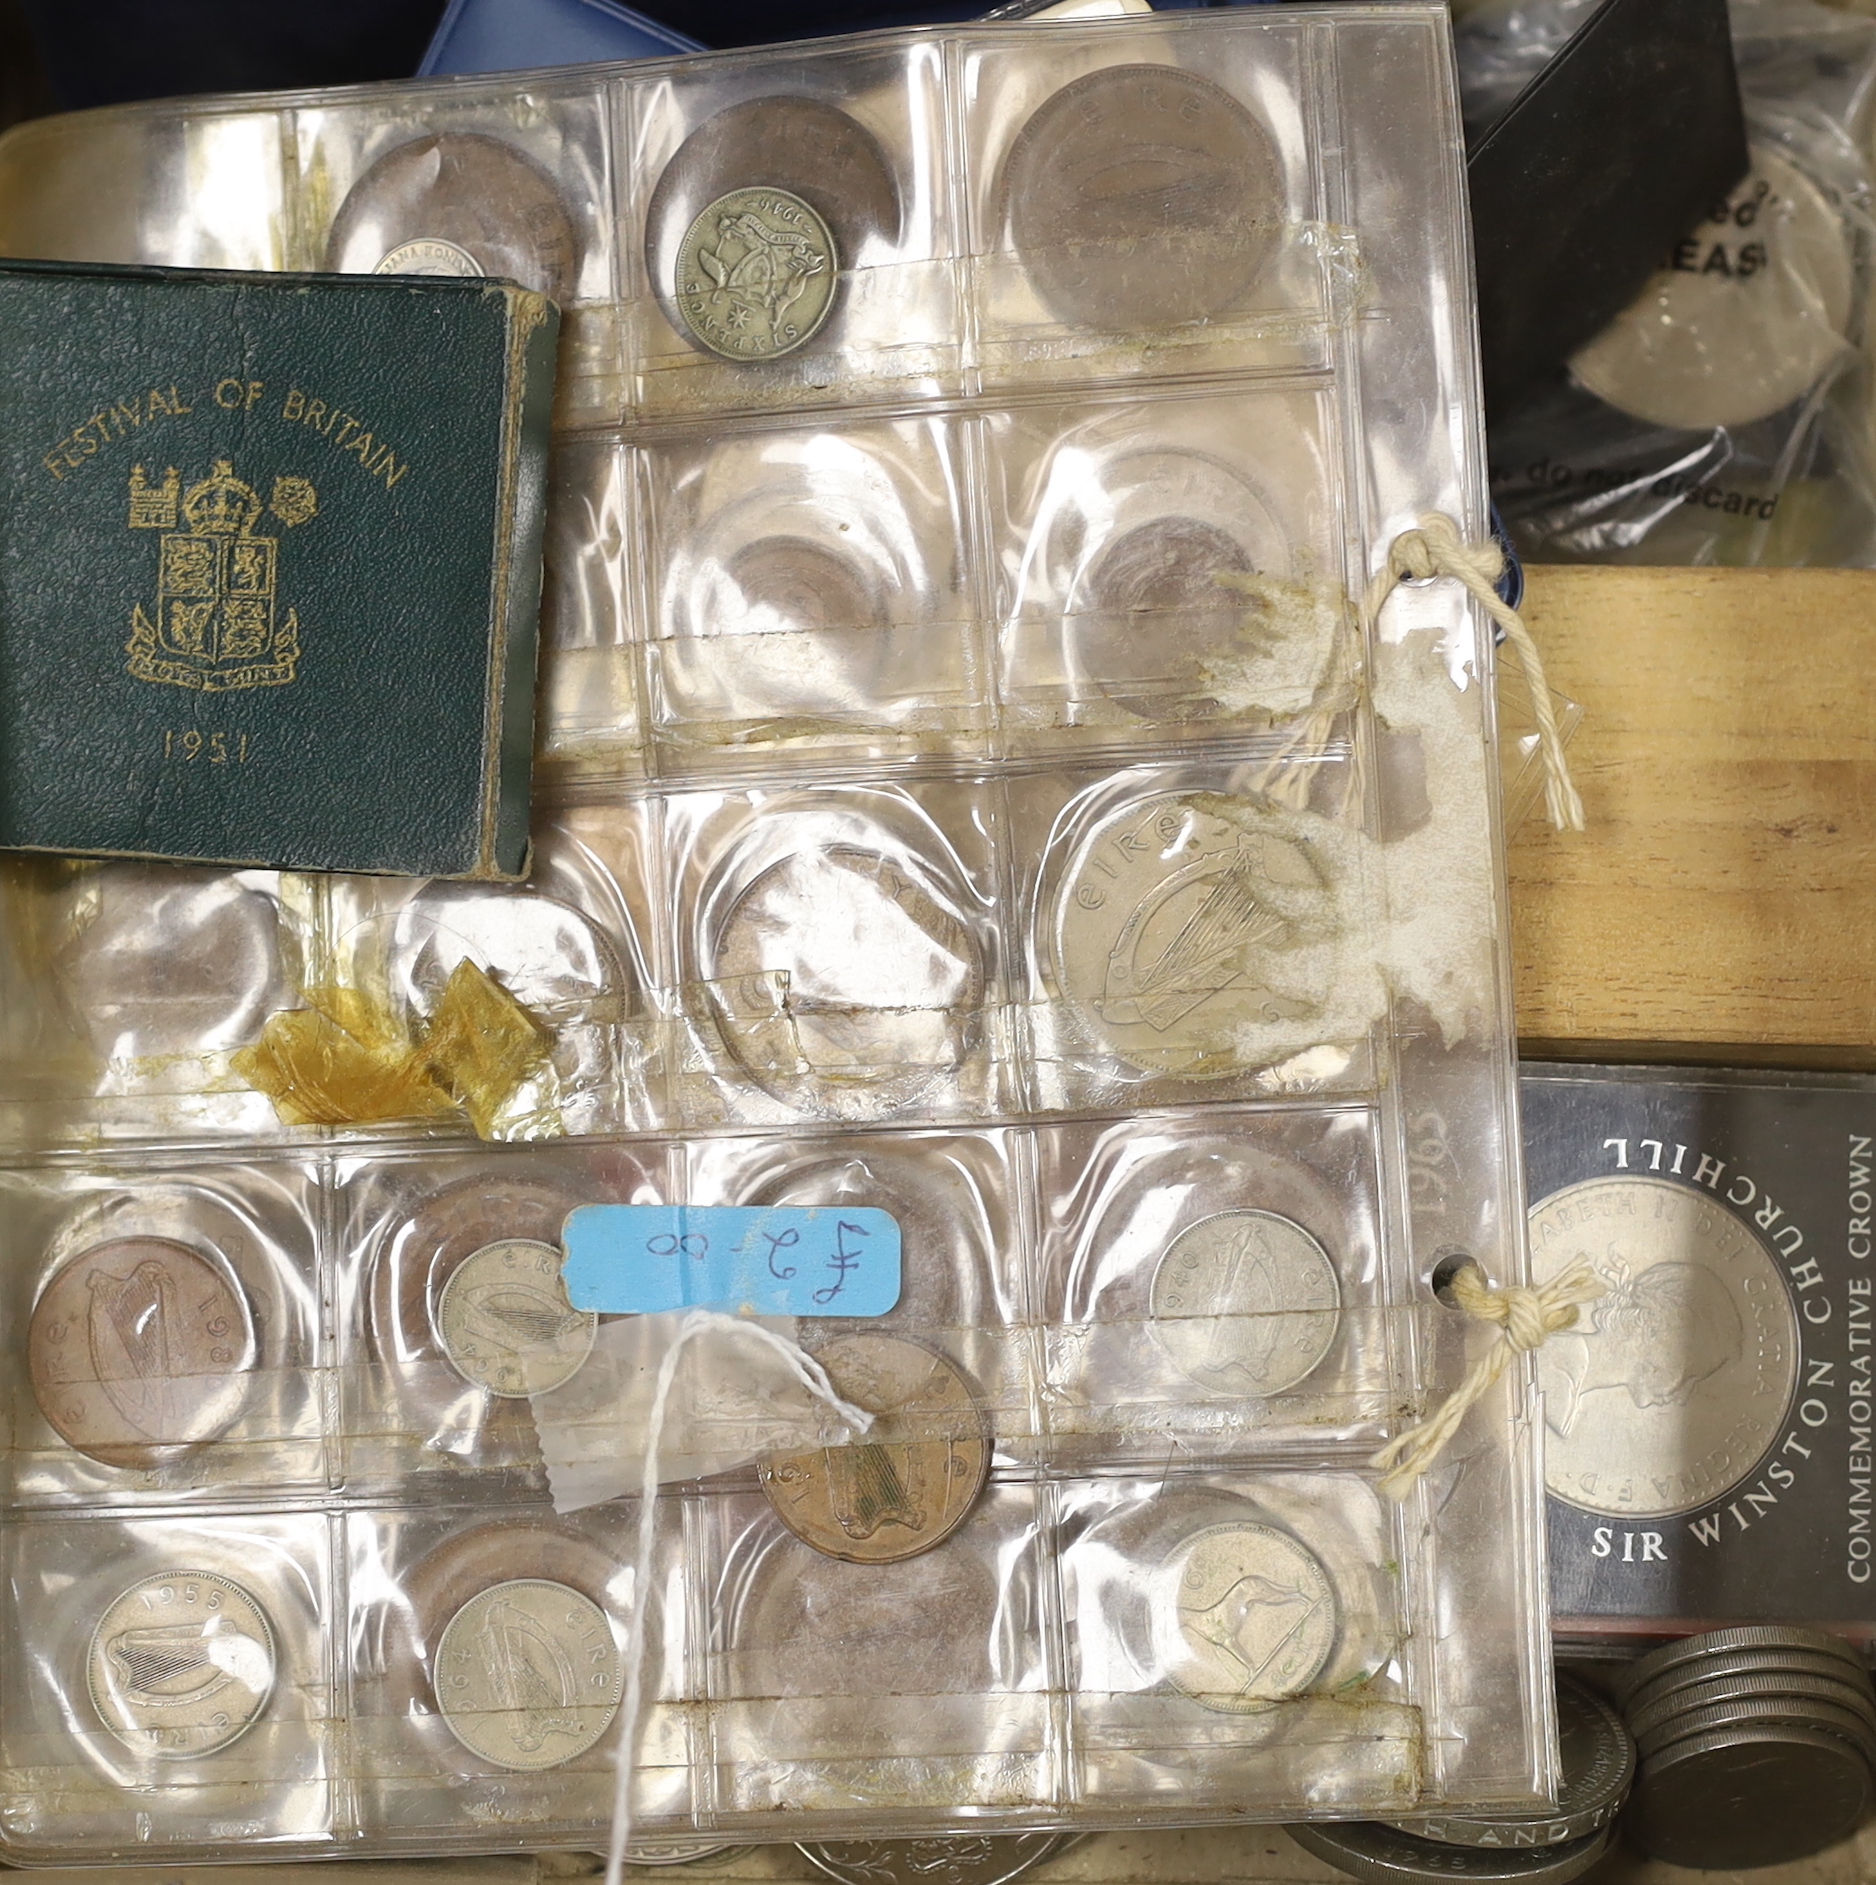 British coins, mostly QEII BUNC Decimal coin sets and commemorative crowns, Festival of Britain crowns 1951, together with Ireland coins